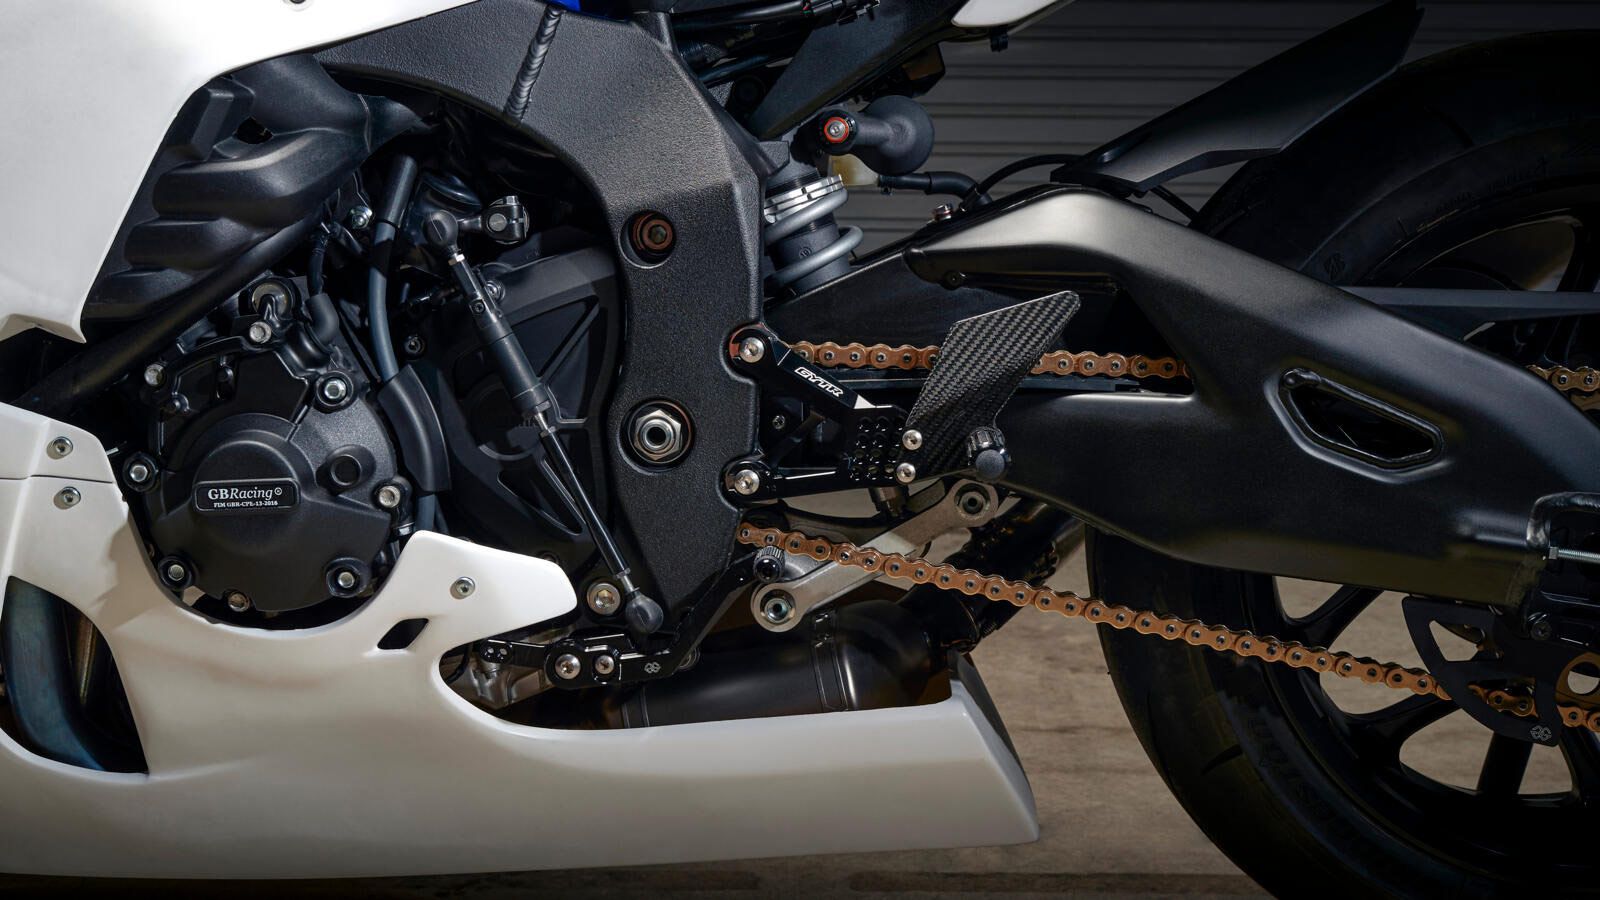 It comes with 520 chain, GP shift, and billet rearsets.